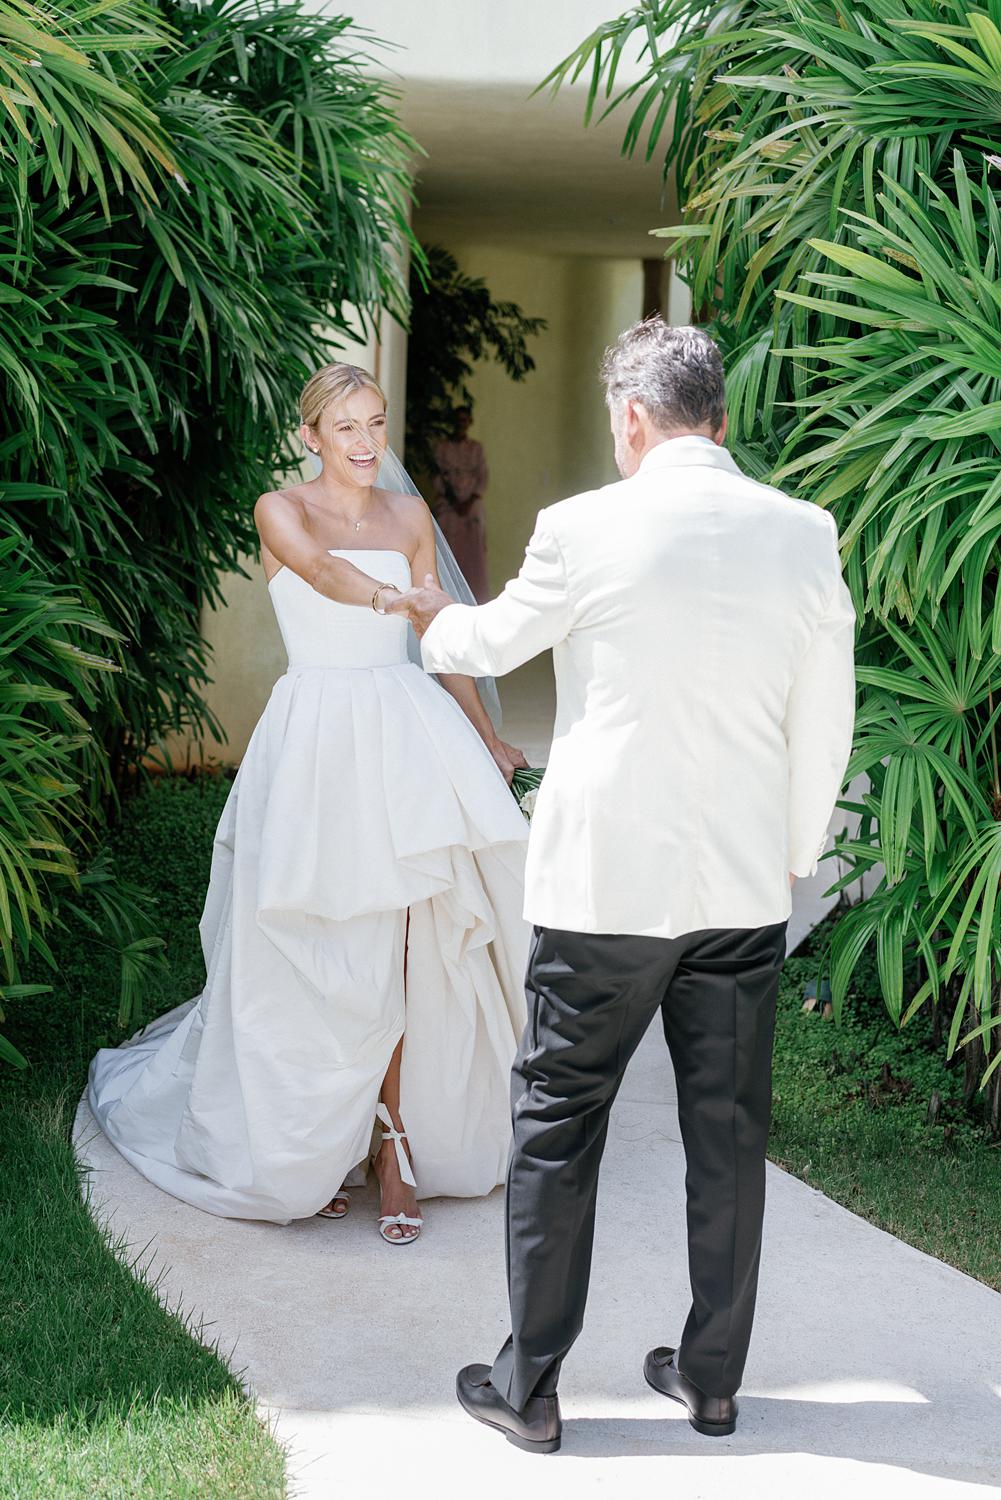 Father looking at the bride for the first time during their wedding at Altos de Chavón.